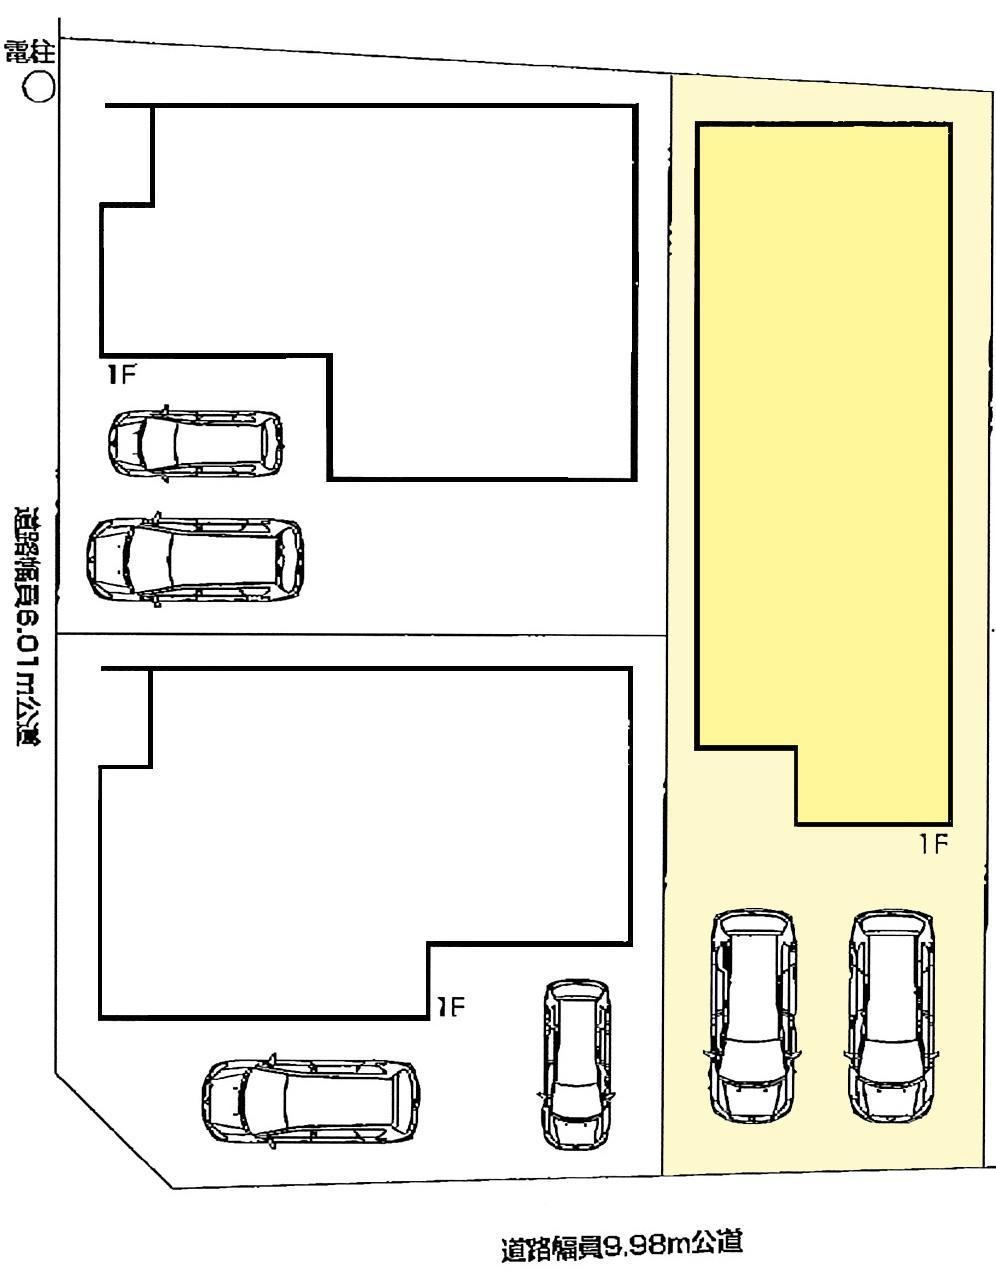 Compartment figure.  ◆ Parallel two PARKING ◆ 